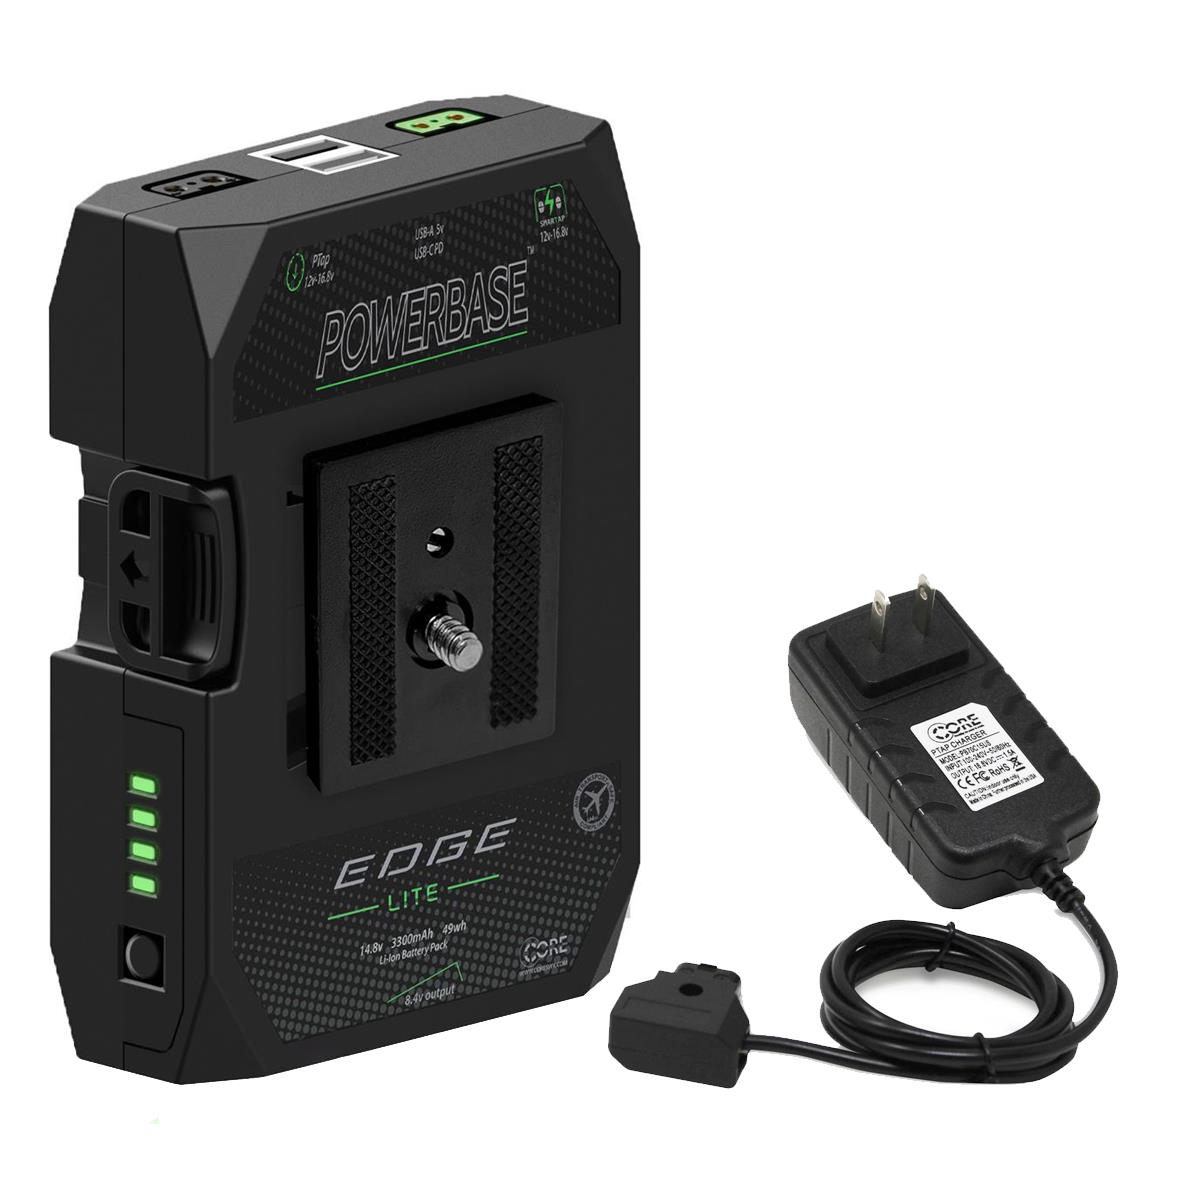 

Core SWX PowerBase Edge Lite 49Wh Battery Pack with D-Tap Charger